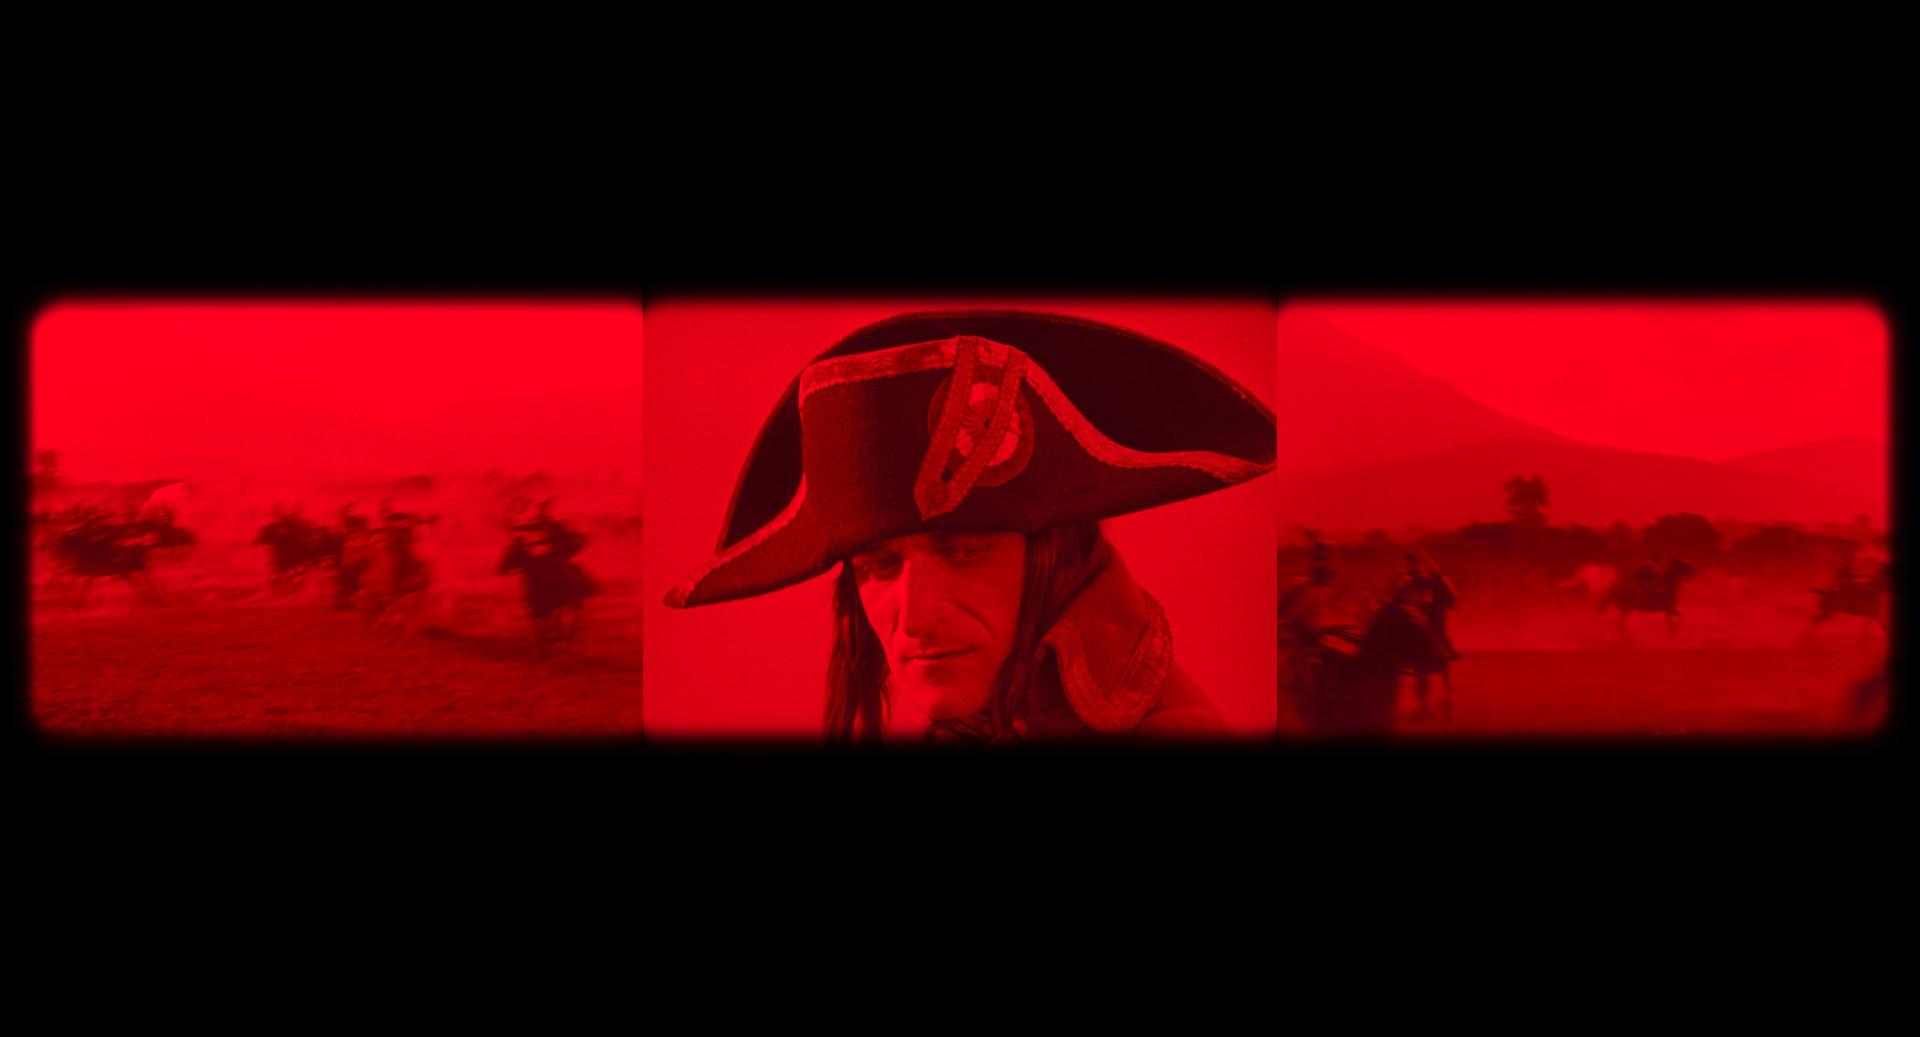 Napoléon by Abel Gance (1st period) opening Cannes Classics at the 77th Festival de Cannes